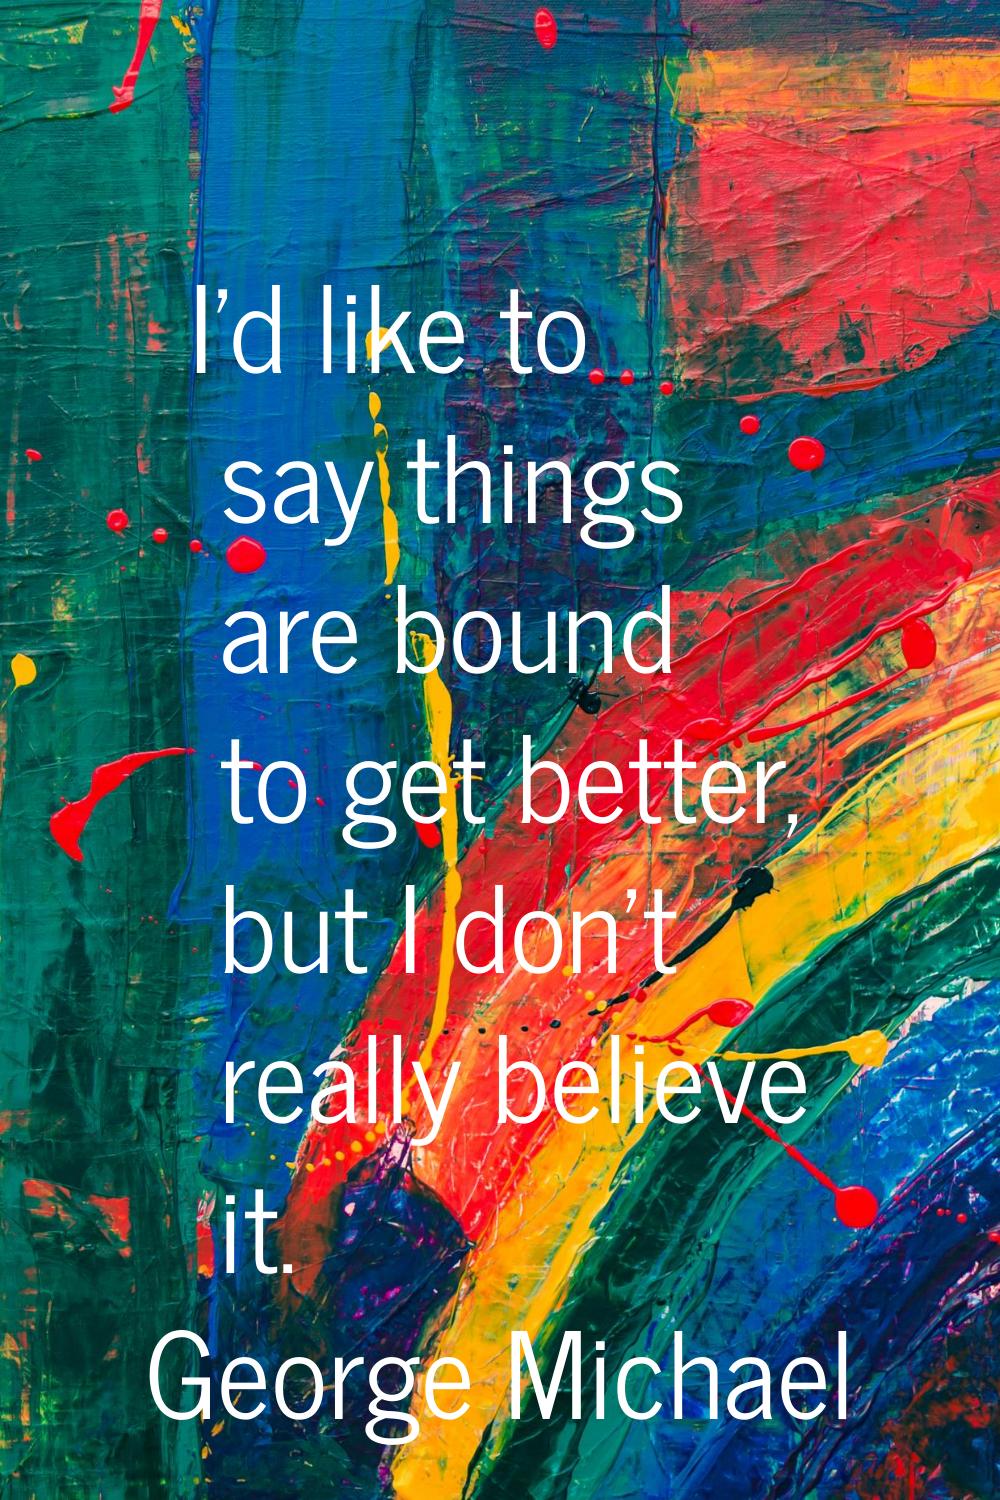 I'd like to say things are bound to get better, but I don't really believe it.